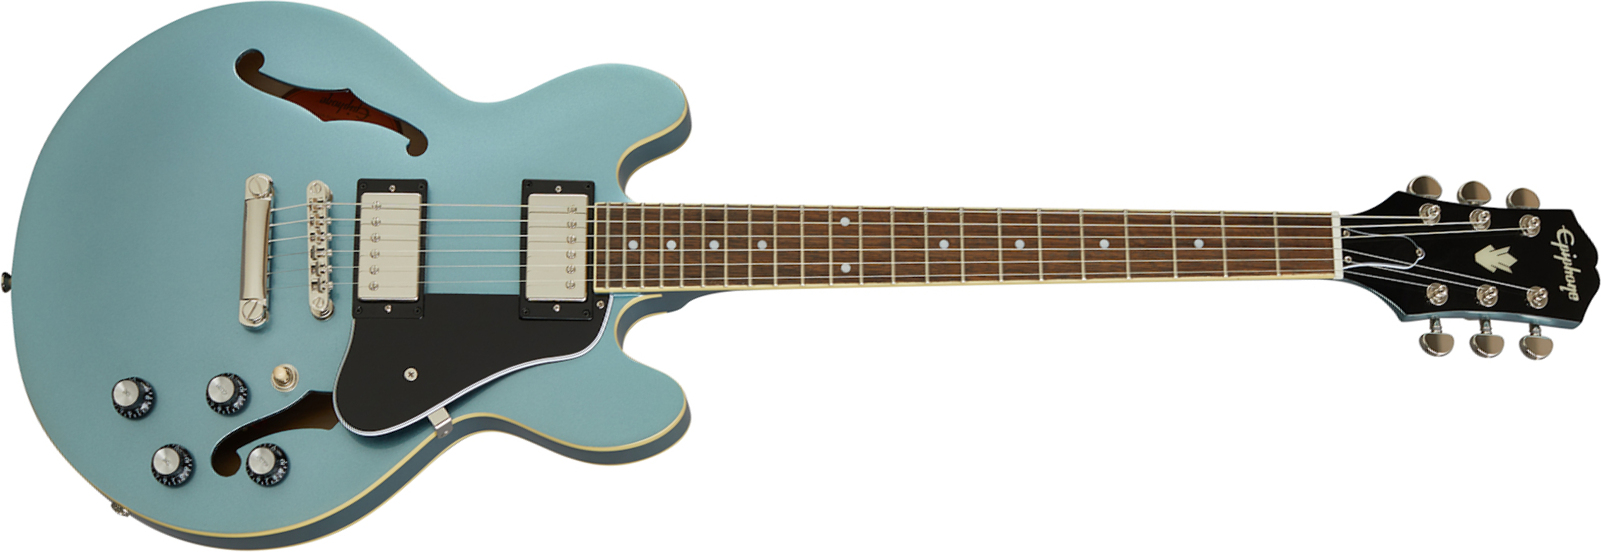 Epiphone Es-339 Inspired By Gibson 2020 2h Ht Rw - Pelham Blue - Semi-hollow electric guitar - Main picture